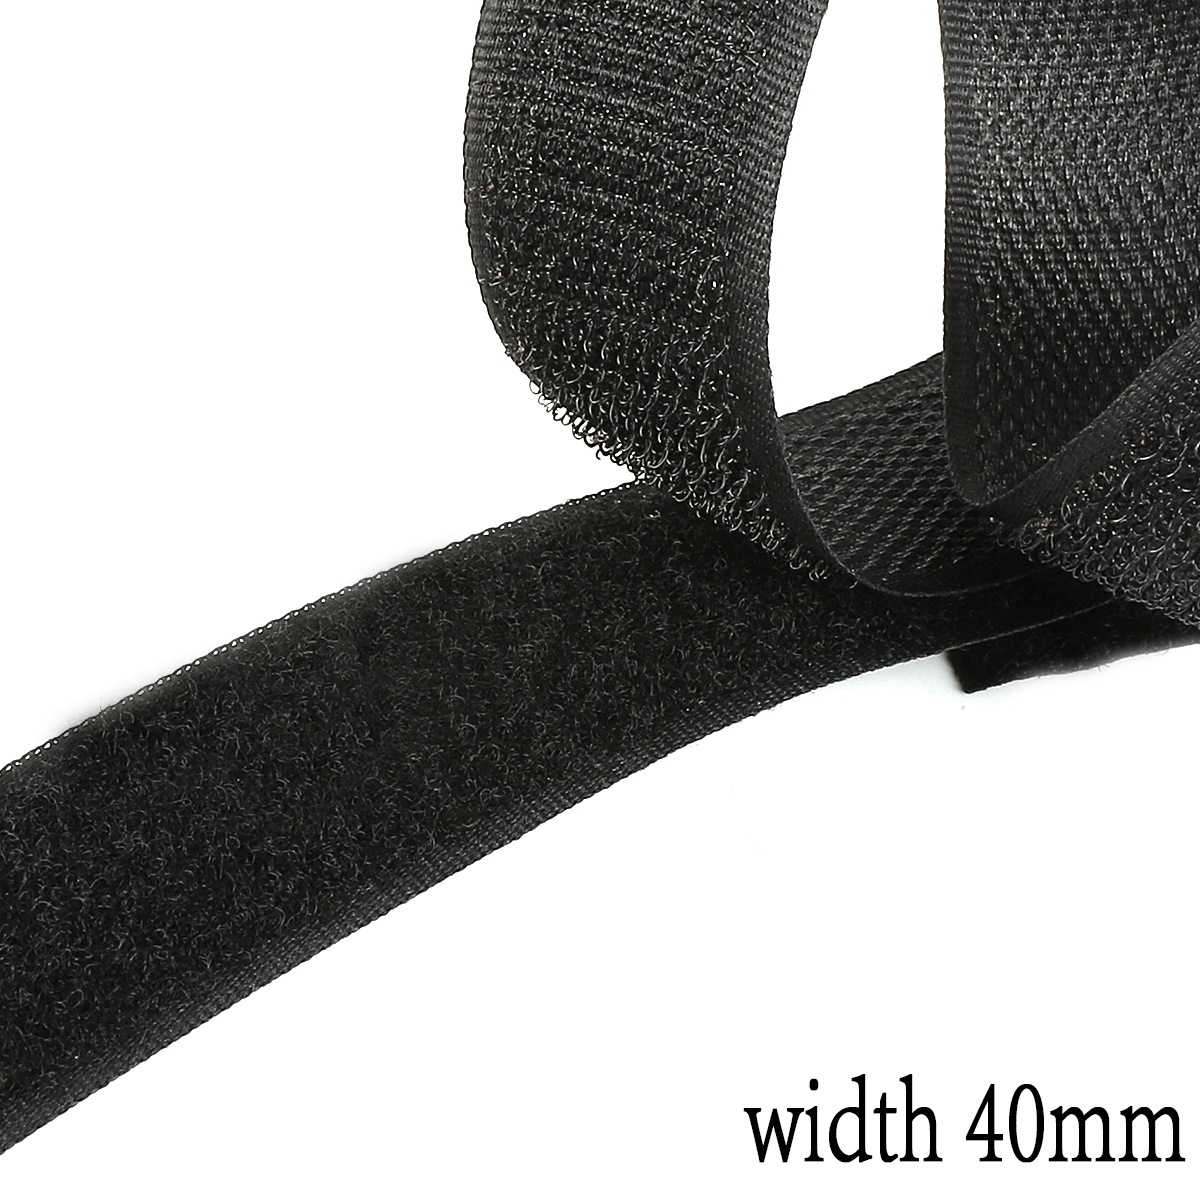 2M 16-40mm Black Not Adhesive Hook and Loop Fastener Tape Sticker Velcros Nylon Magic Tape for DIY Craft Supply Roll Sew On Tape: Black 40mm width